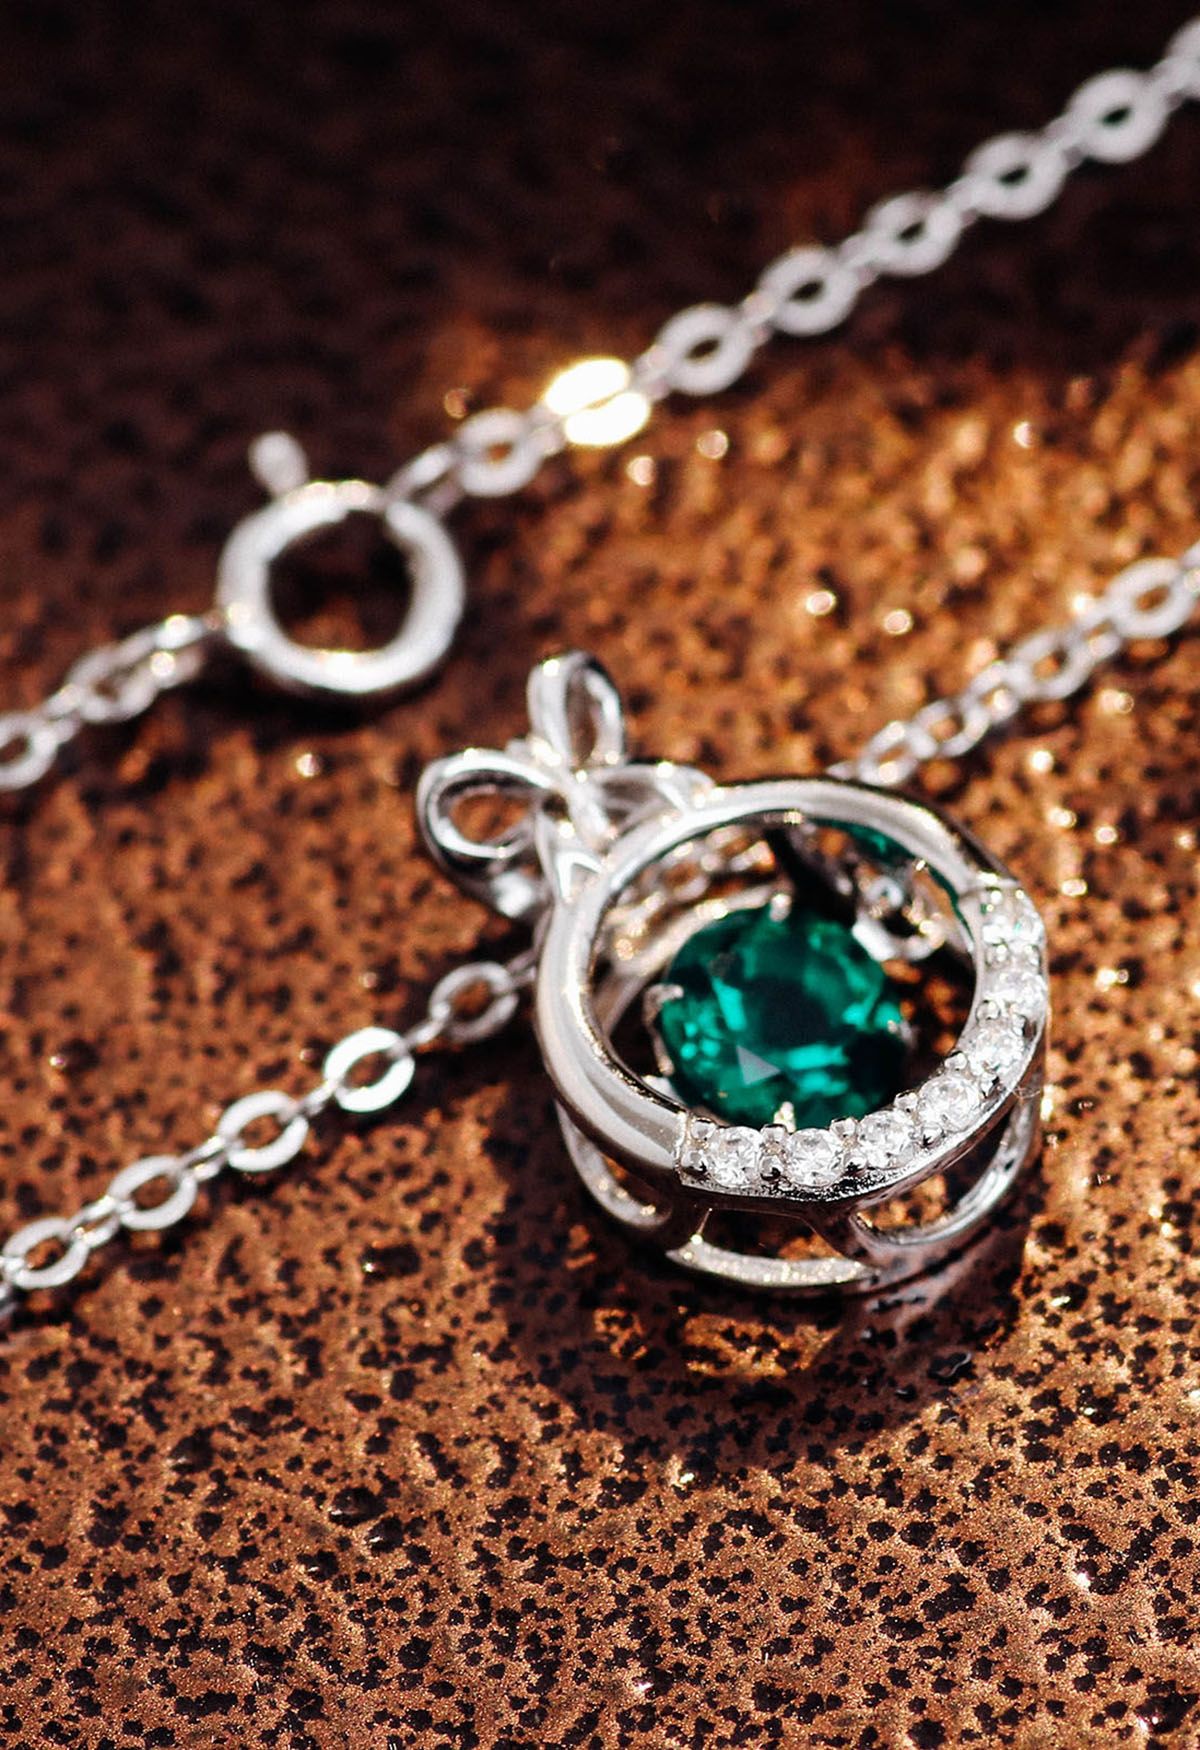 Hollow Out Rounded Emerald Gem Necklace